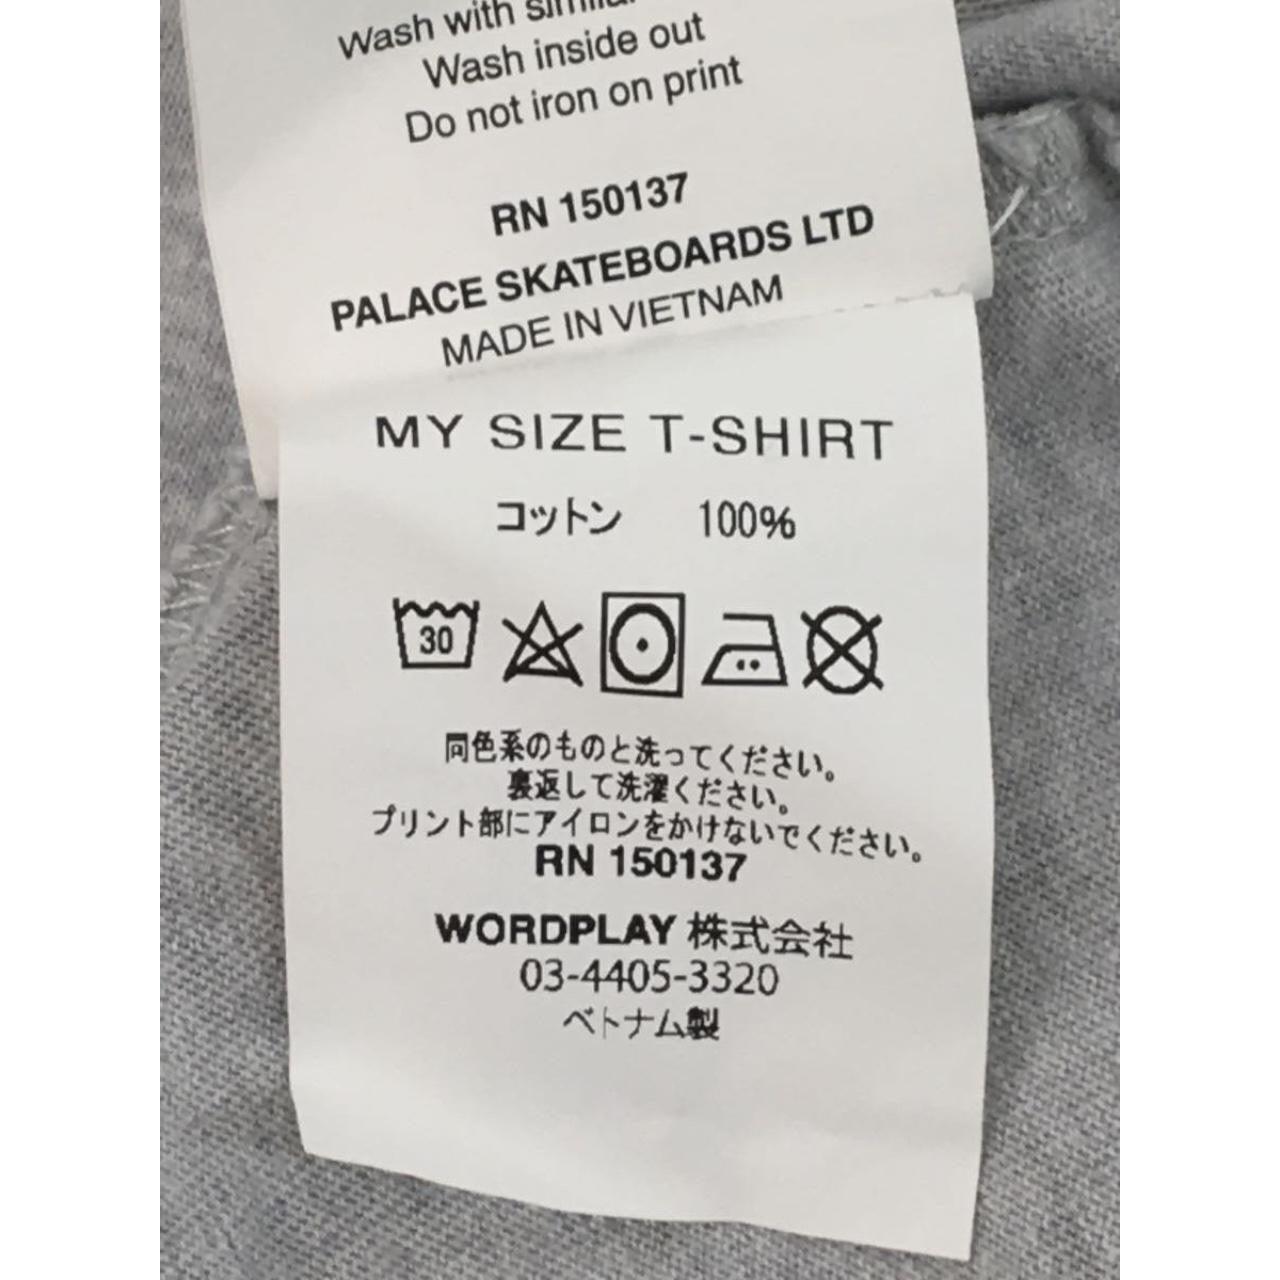 PALACE front Grey T-shirt - Known Source